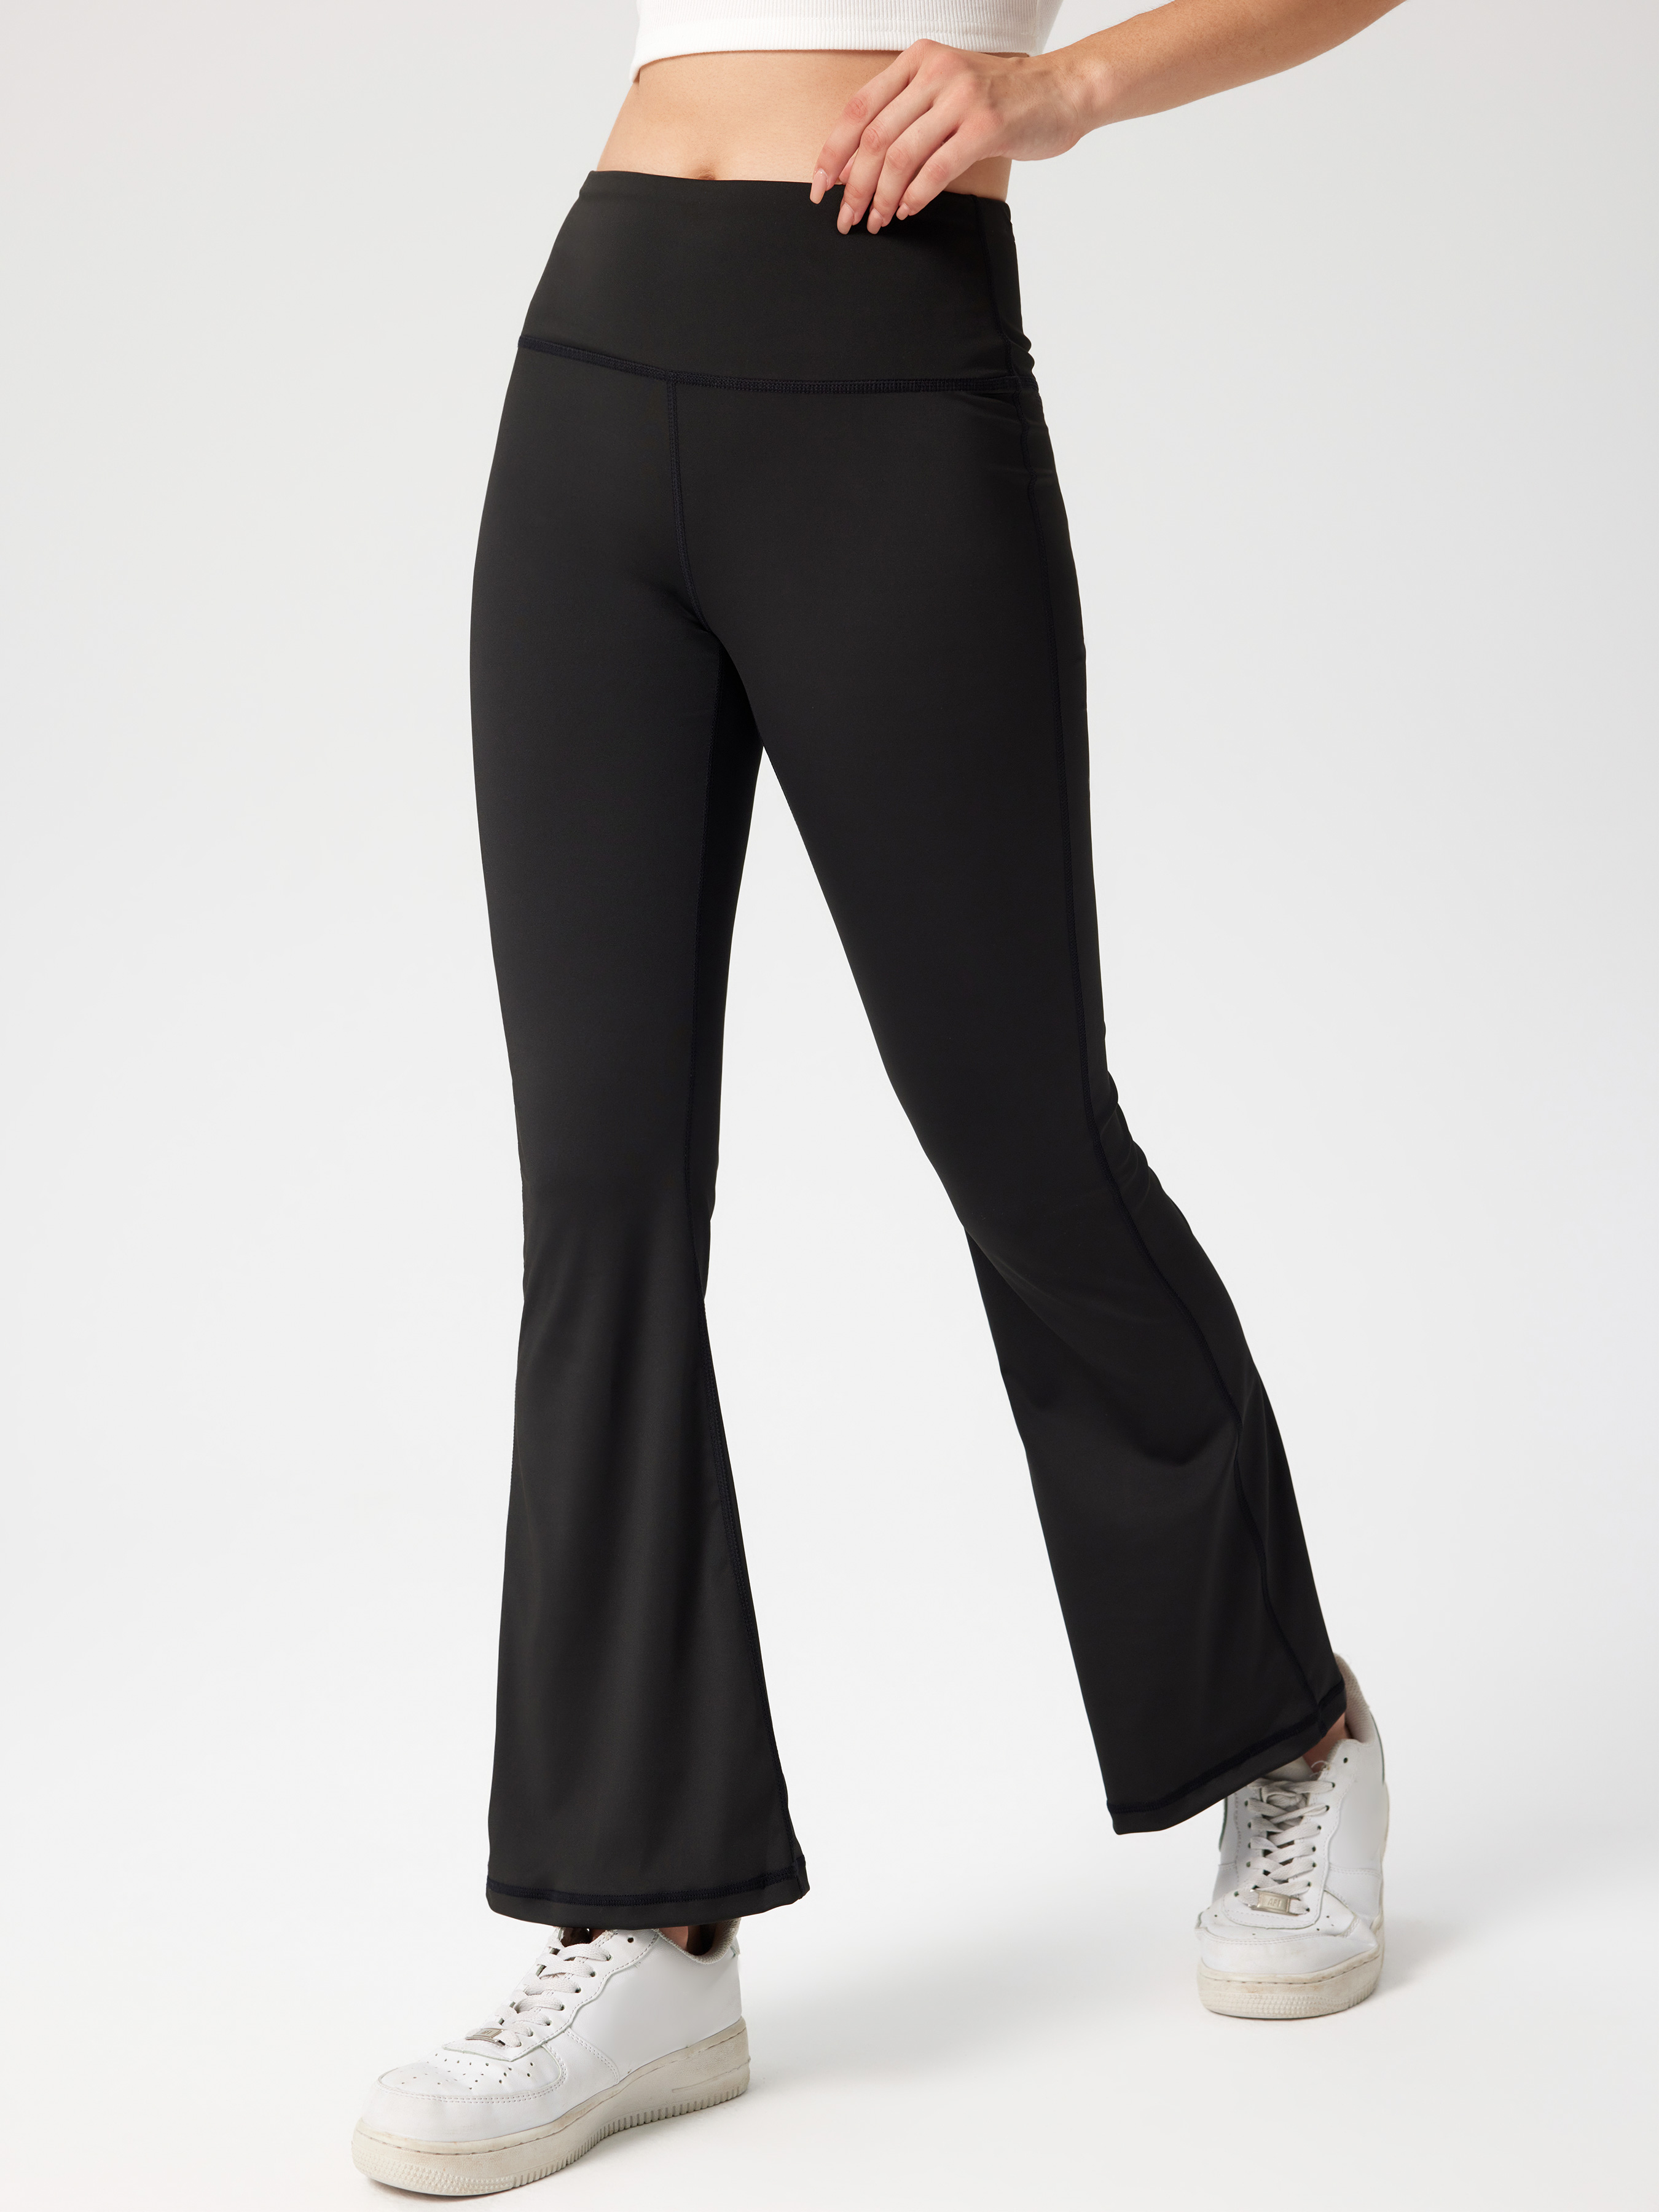 High Waist Solid Flared Leggings Sporty by Cider